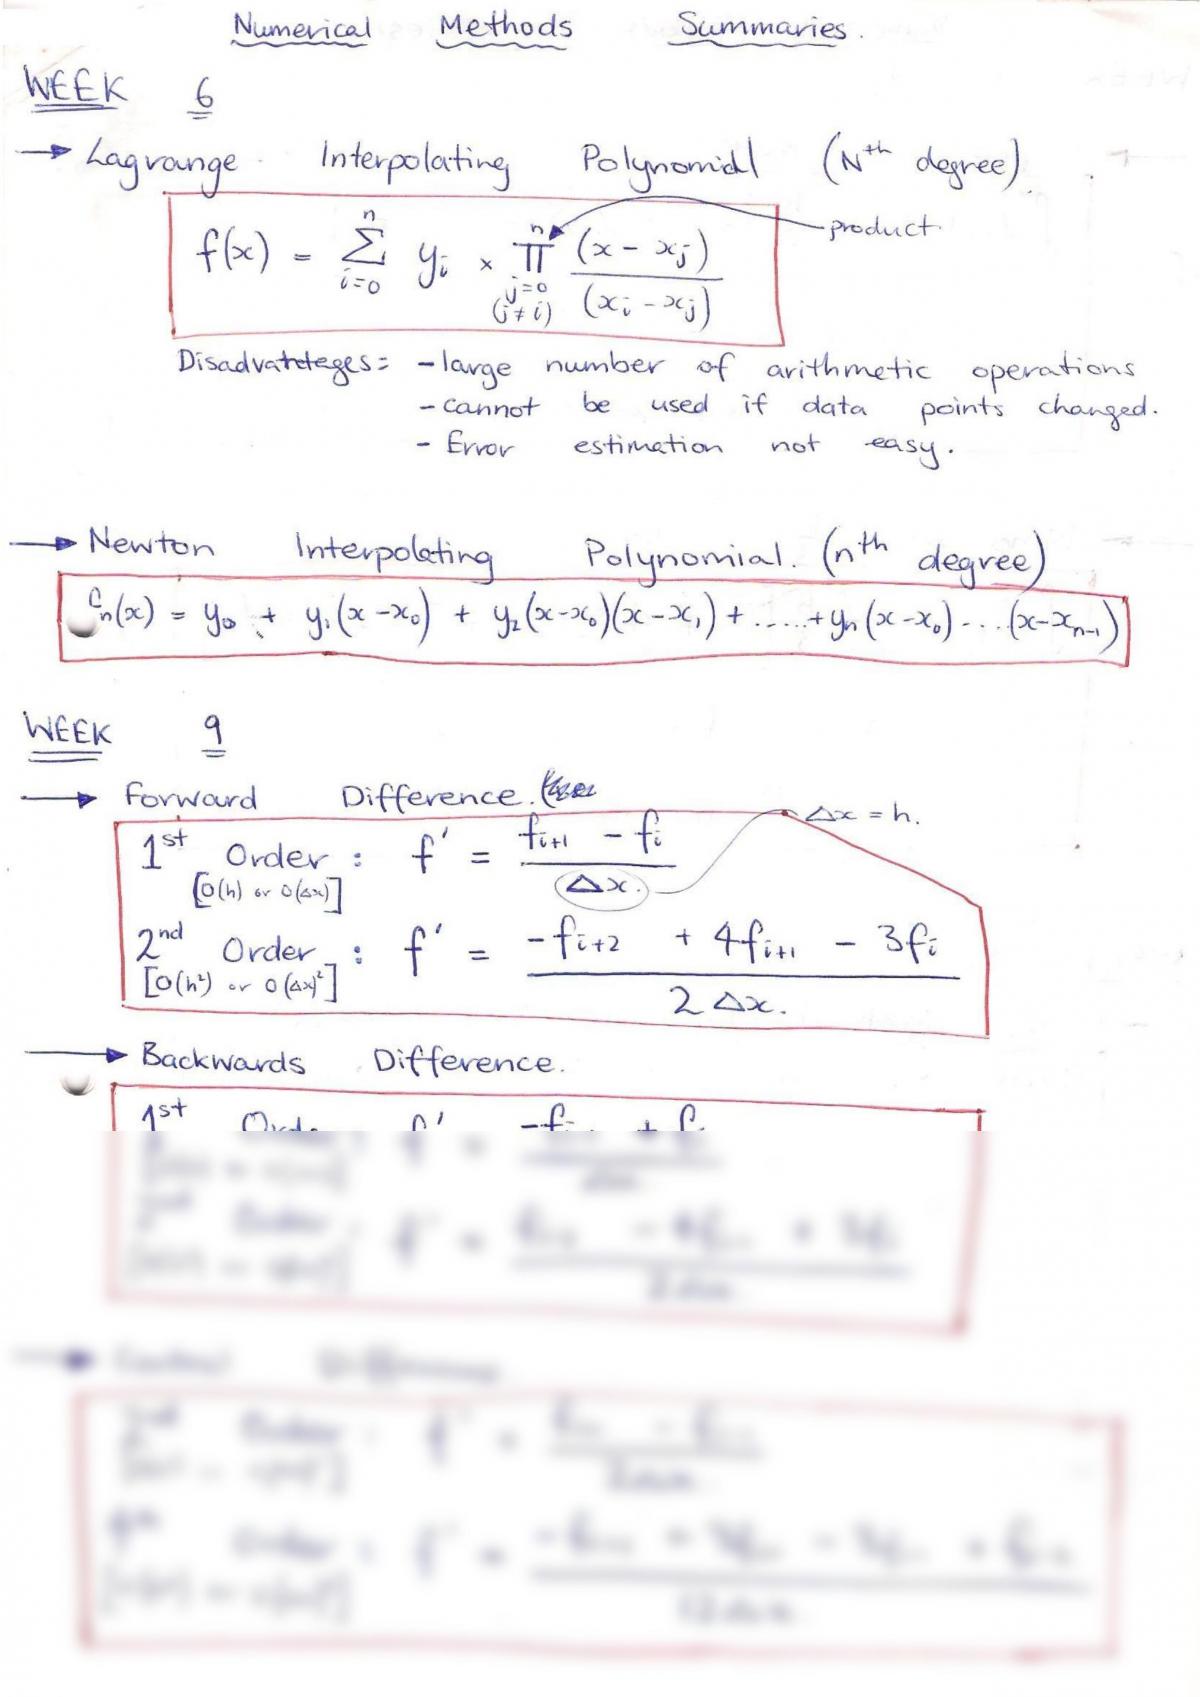 Summary of Numerical Methods - Page 1